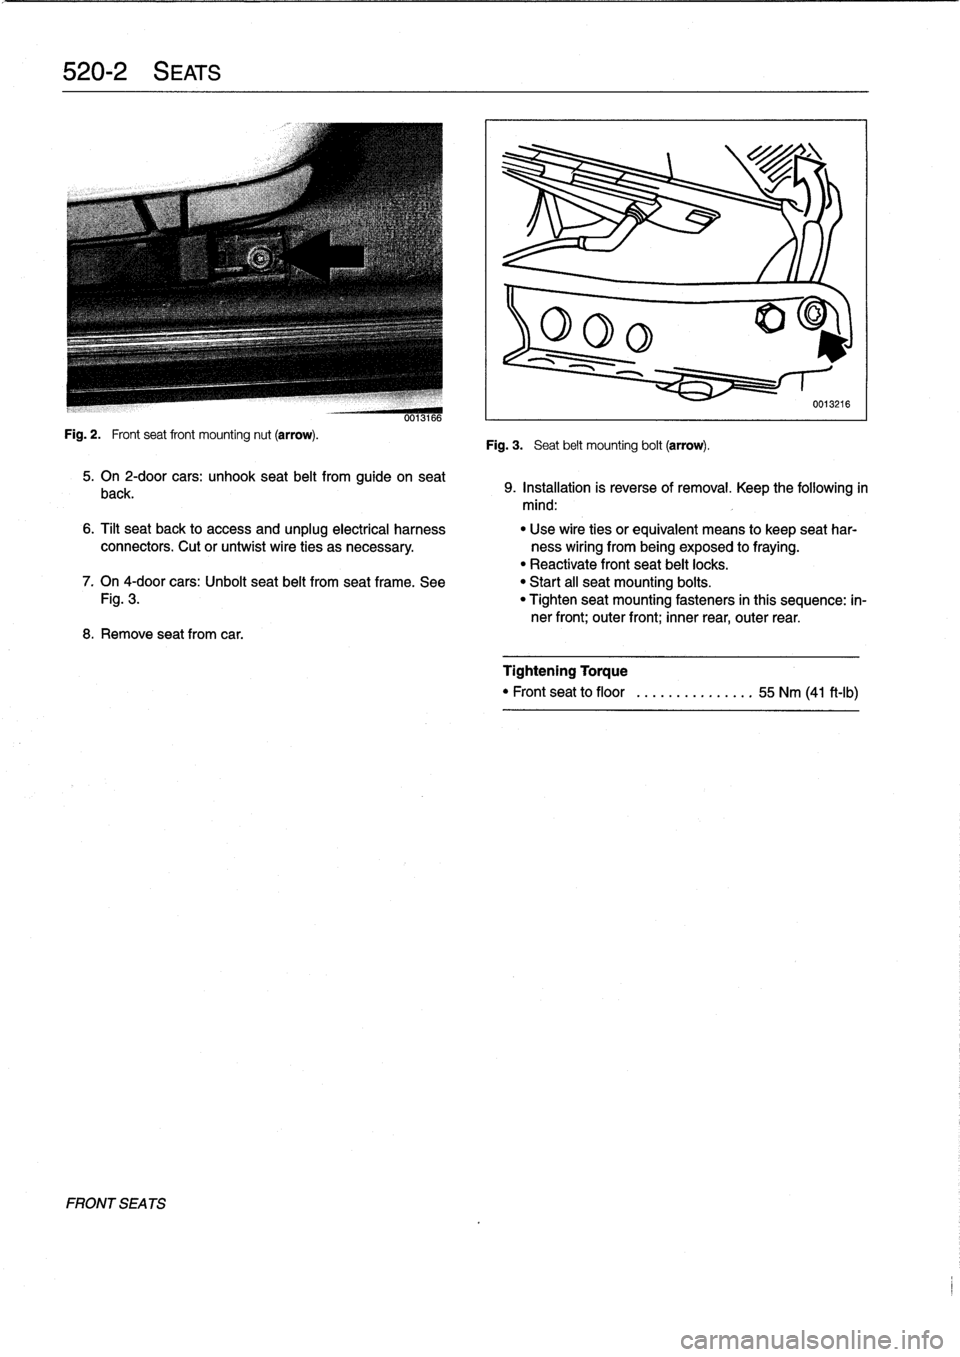 BMW 318i 1997 E36 Owners Manual 520-2

	

S
EATS

Fig
.
2
.

	

Frontseat
front
mounting
nut
(arrow)
.

FRONT
SEA
TS

0013166

5
.
On
2-door
cars
:
unhook
seat
belt
from
guide
on
seat

back
.

8
.
Remove
seatfrom
car
.

Fig
.
3
.

	